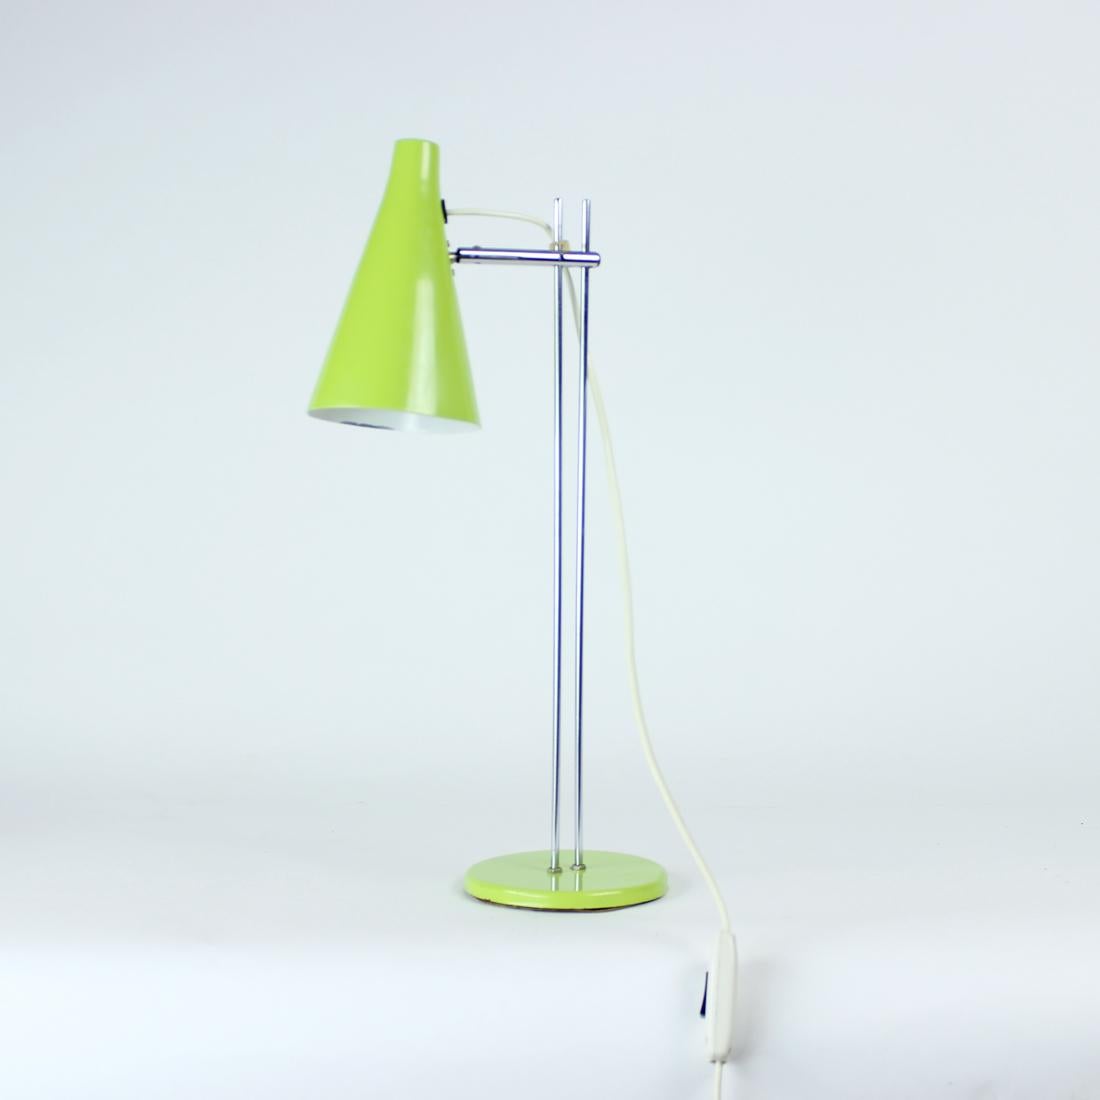 Beautiful table lamp designed by Josef Hurka for Lidokov company in Czechoslovakia in 1960s. Classical midcentury design with simple lines and beautiful details. Made of metal. Lacquered metal in fresh green color on shield and base. The chrome